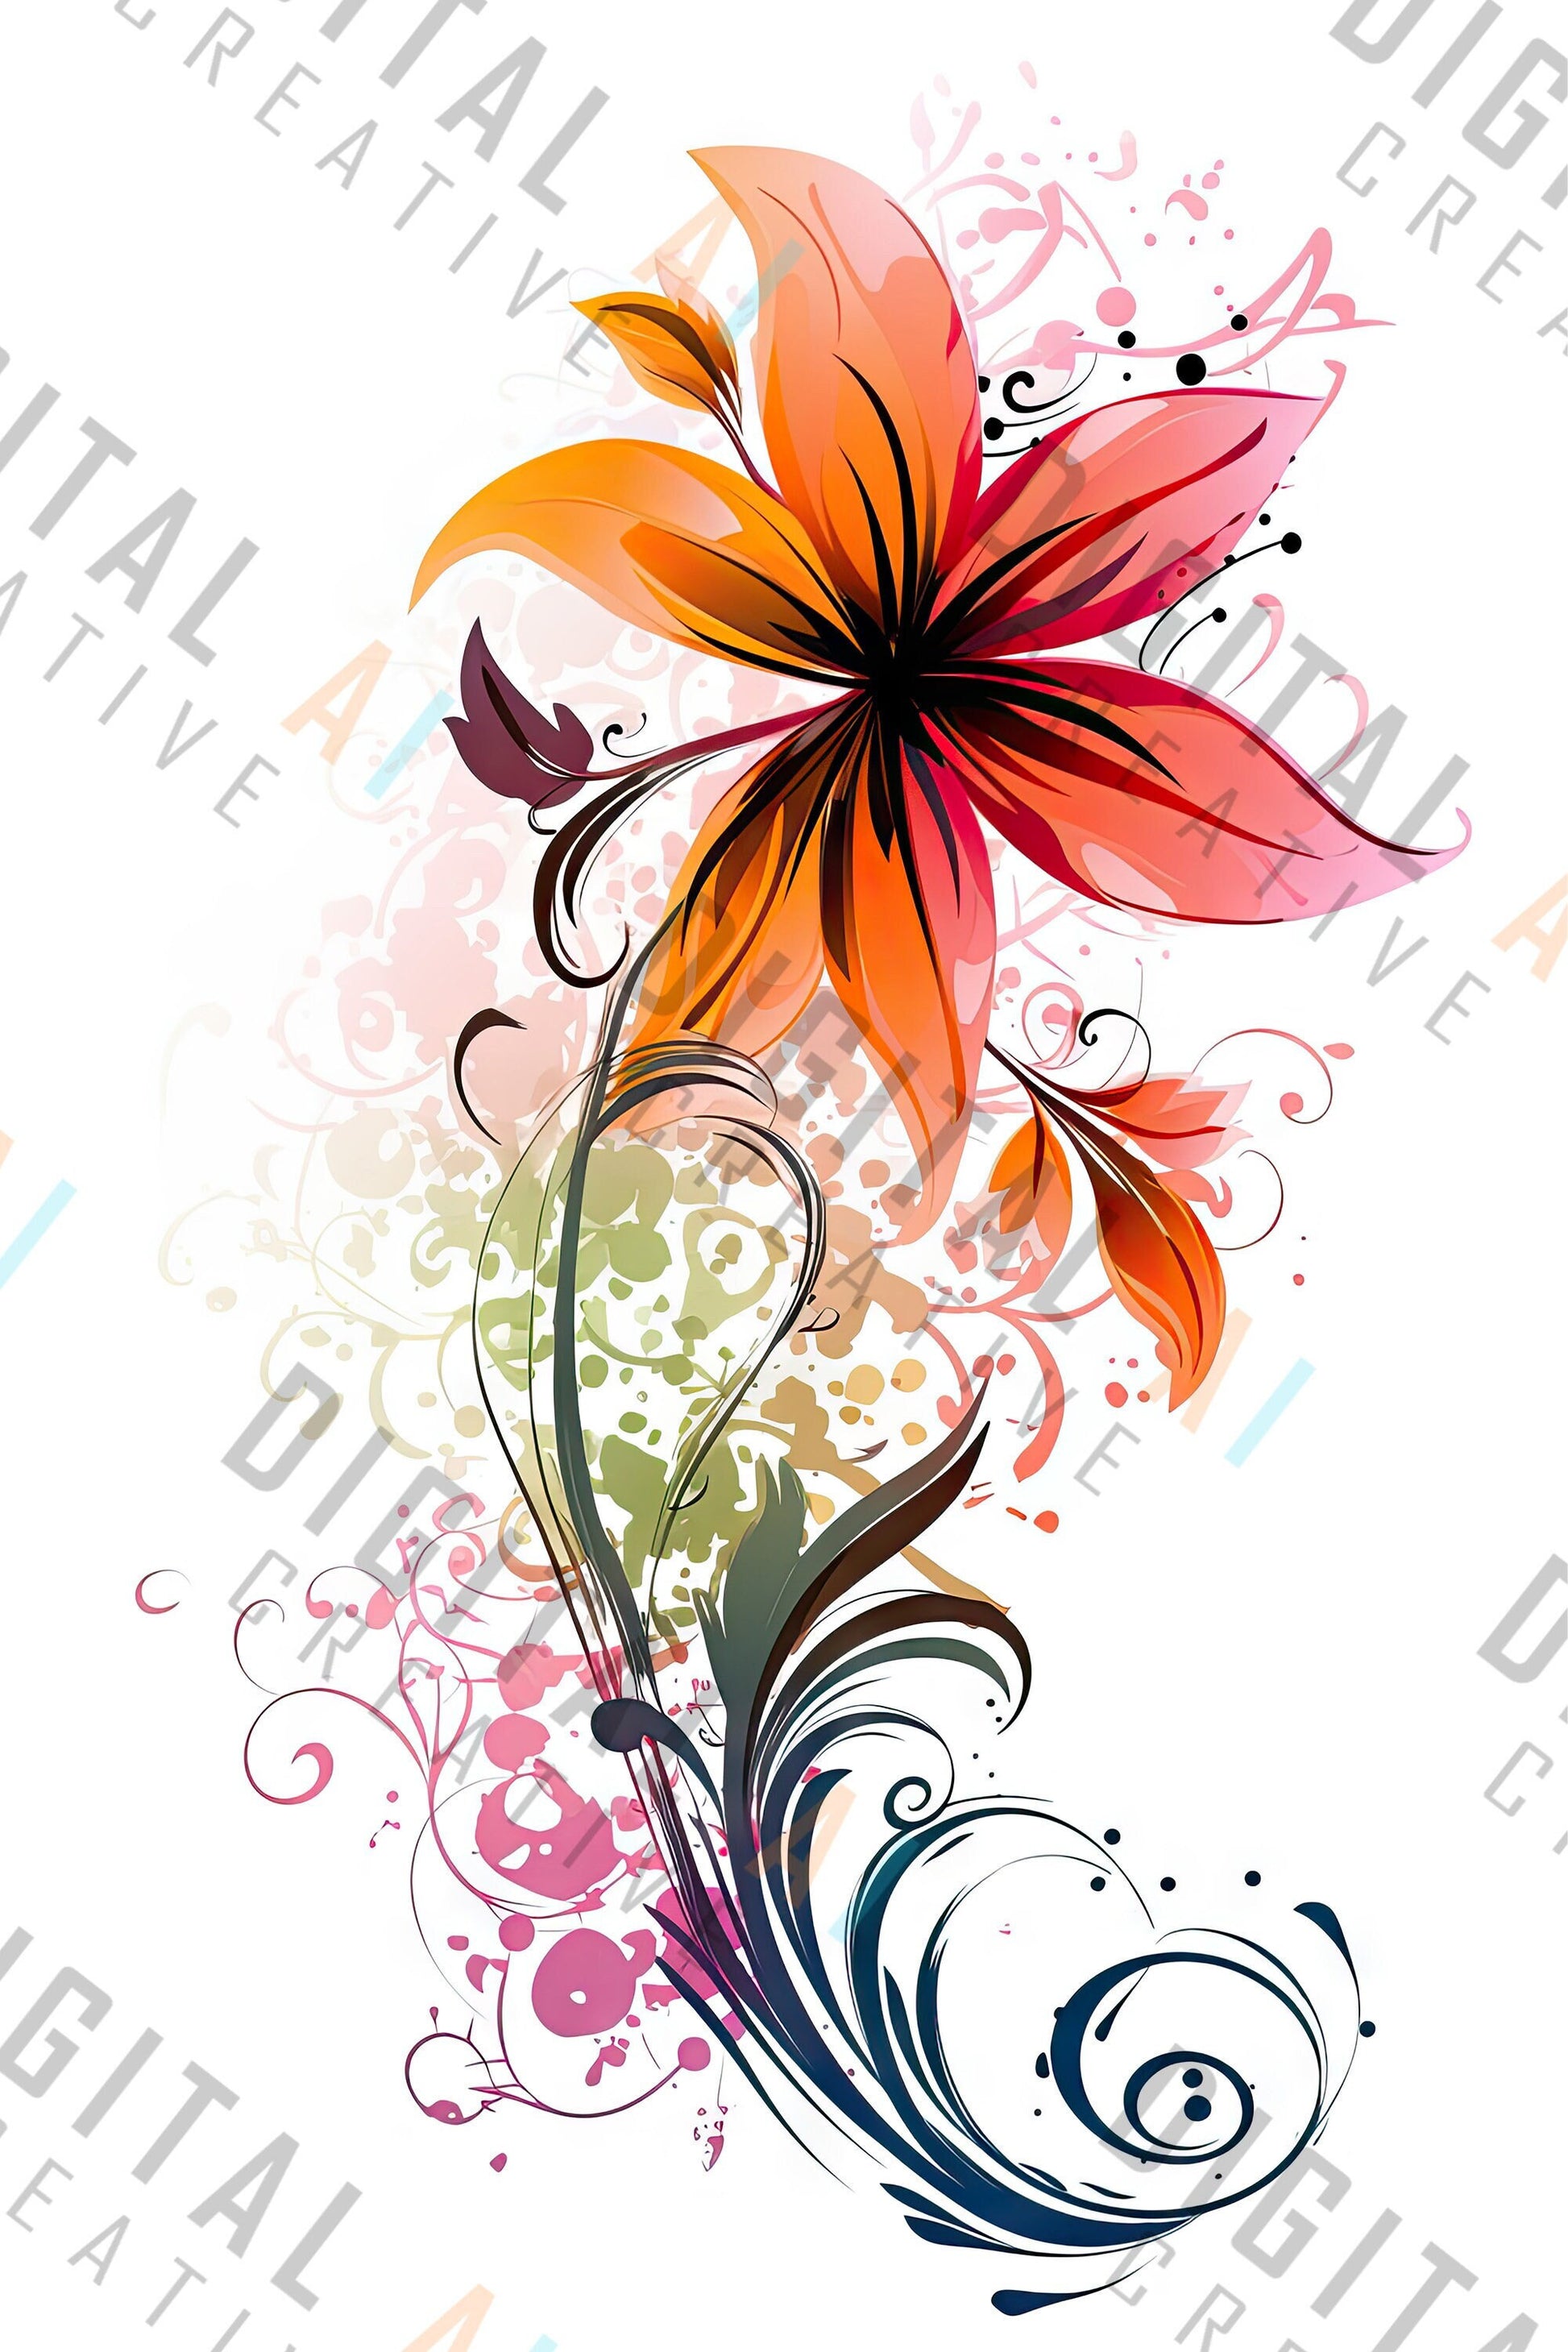 Digital Illustration Package - X8 Flower Garden - A Colorful Collection of Flower Designs Vol 3 - 5376 x 8064 @300DPI